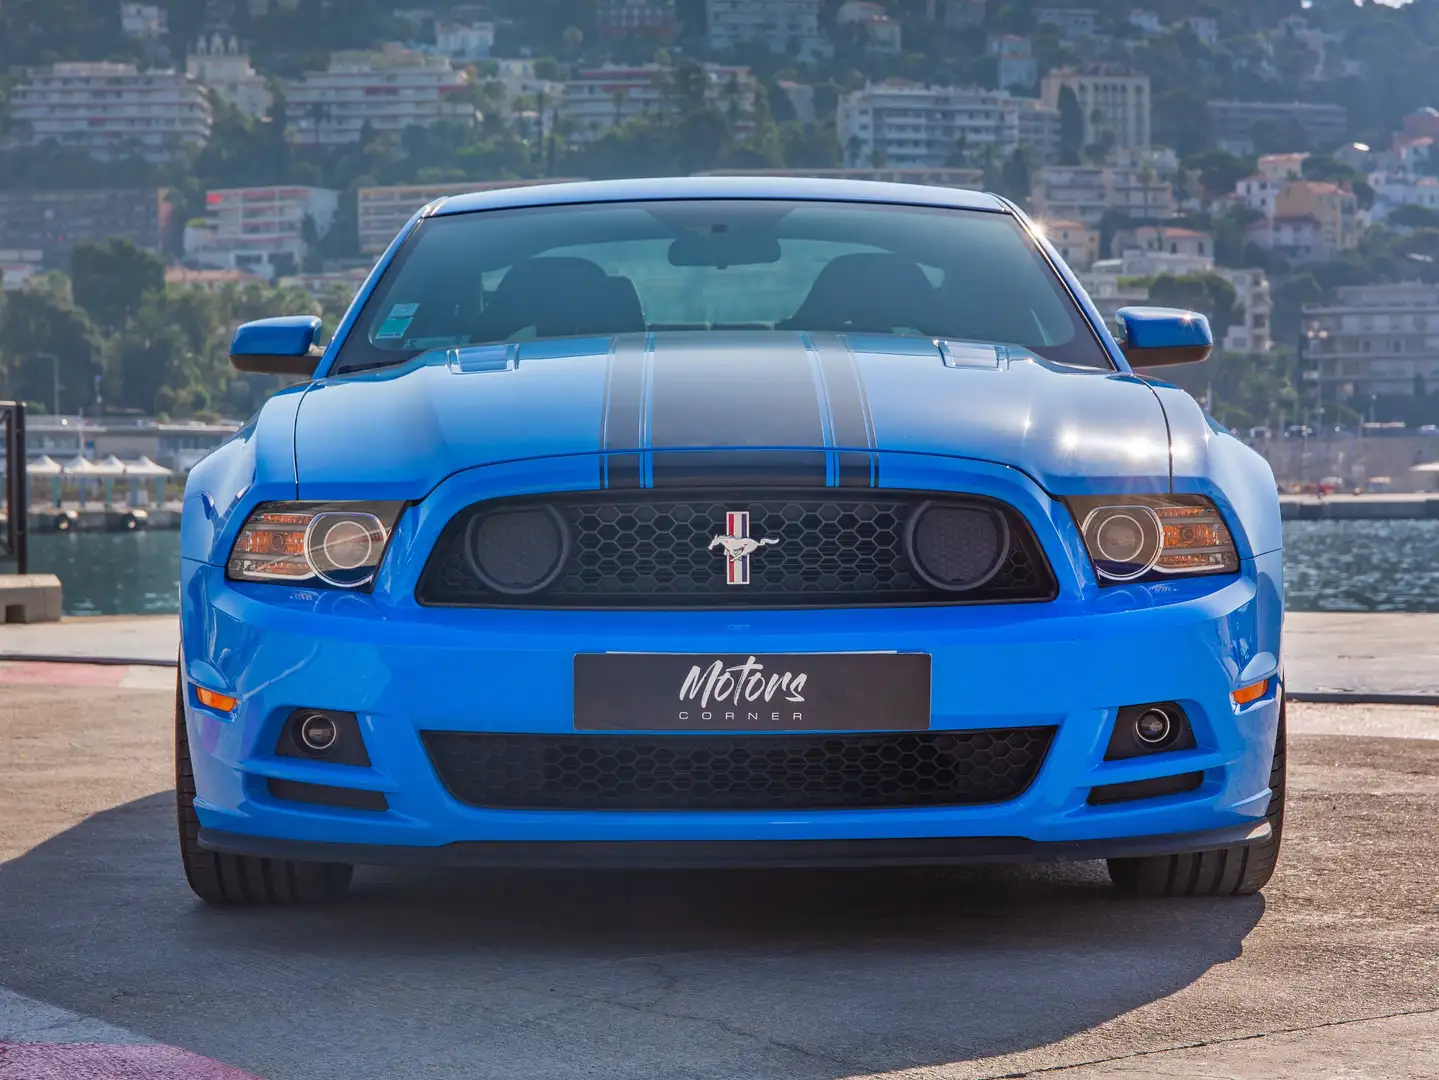 Ford Mustang Boss 302 Blue - 2